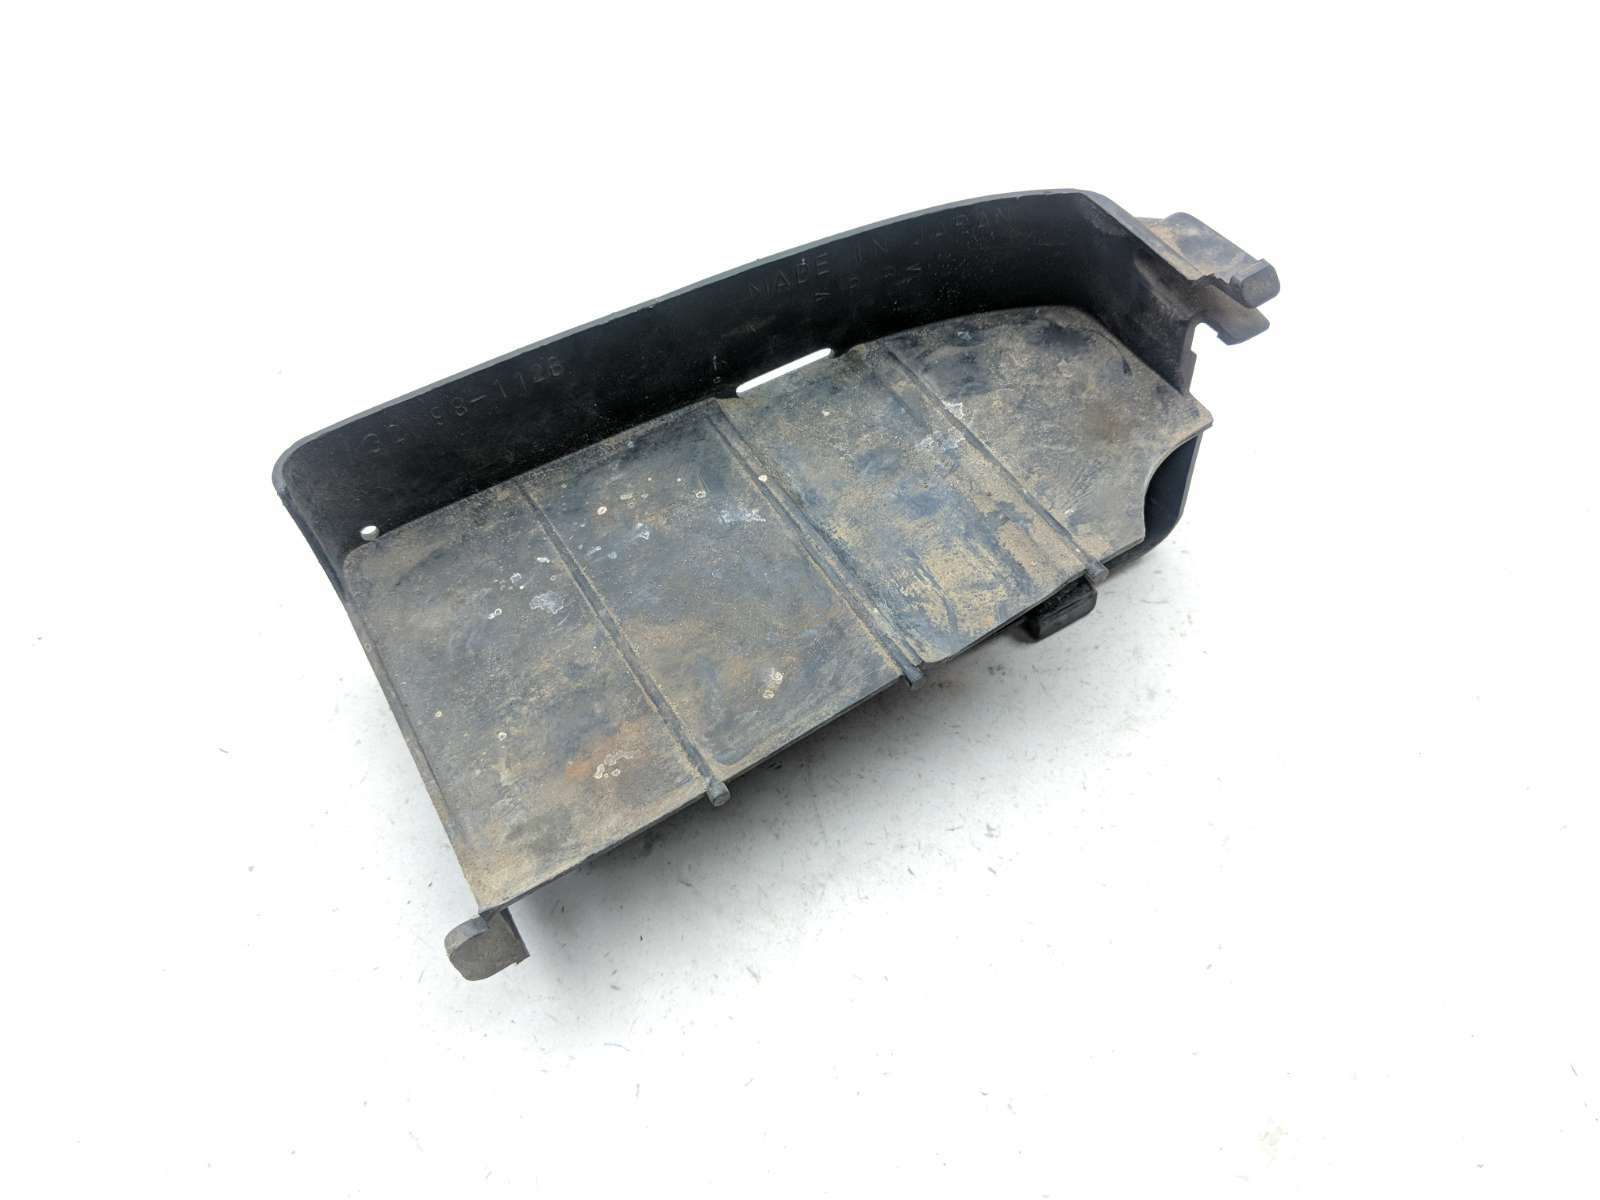 02 Kawasaki VN1500 Vulcan Nomad Side Cover Tool Case Panel